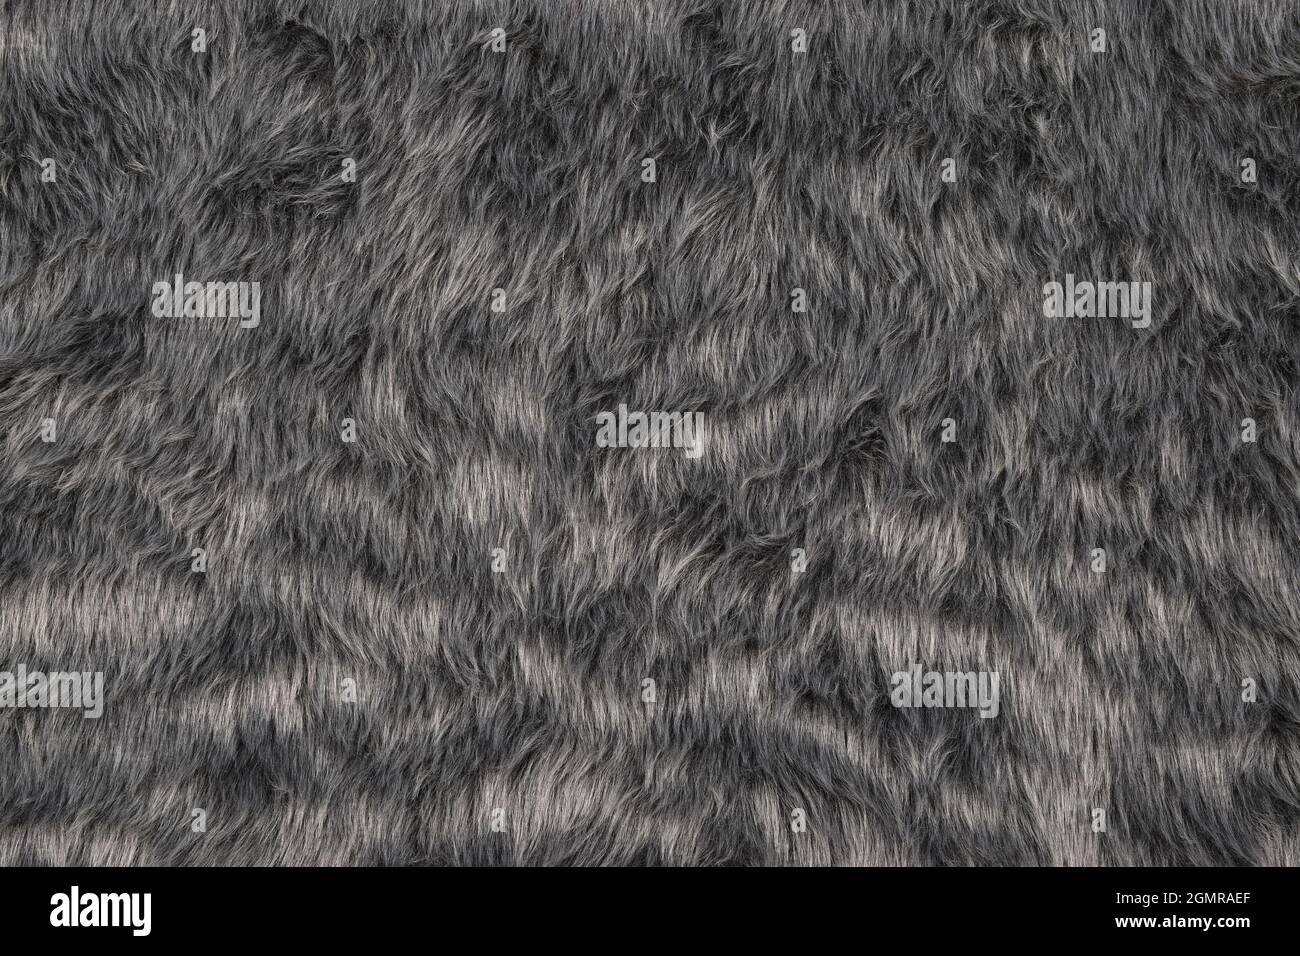 Top view of fur texture background, grey fur pattern texture Stock Photo